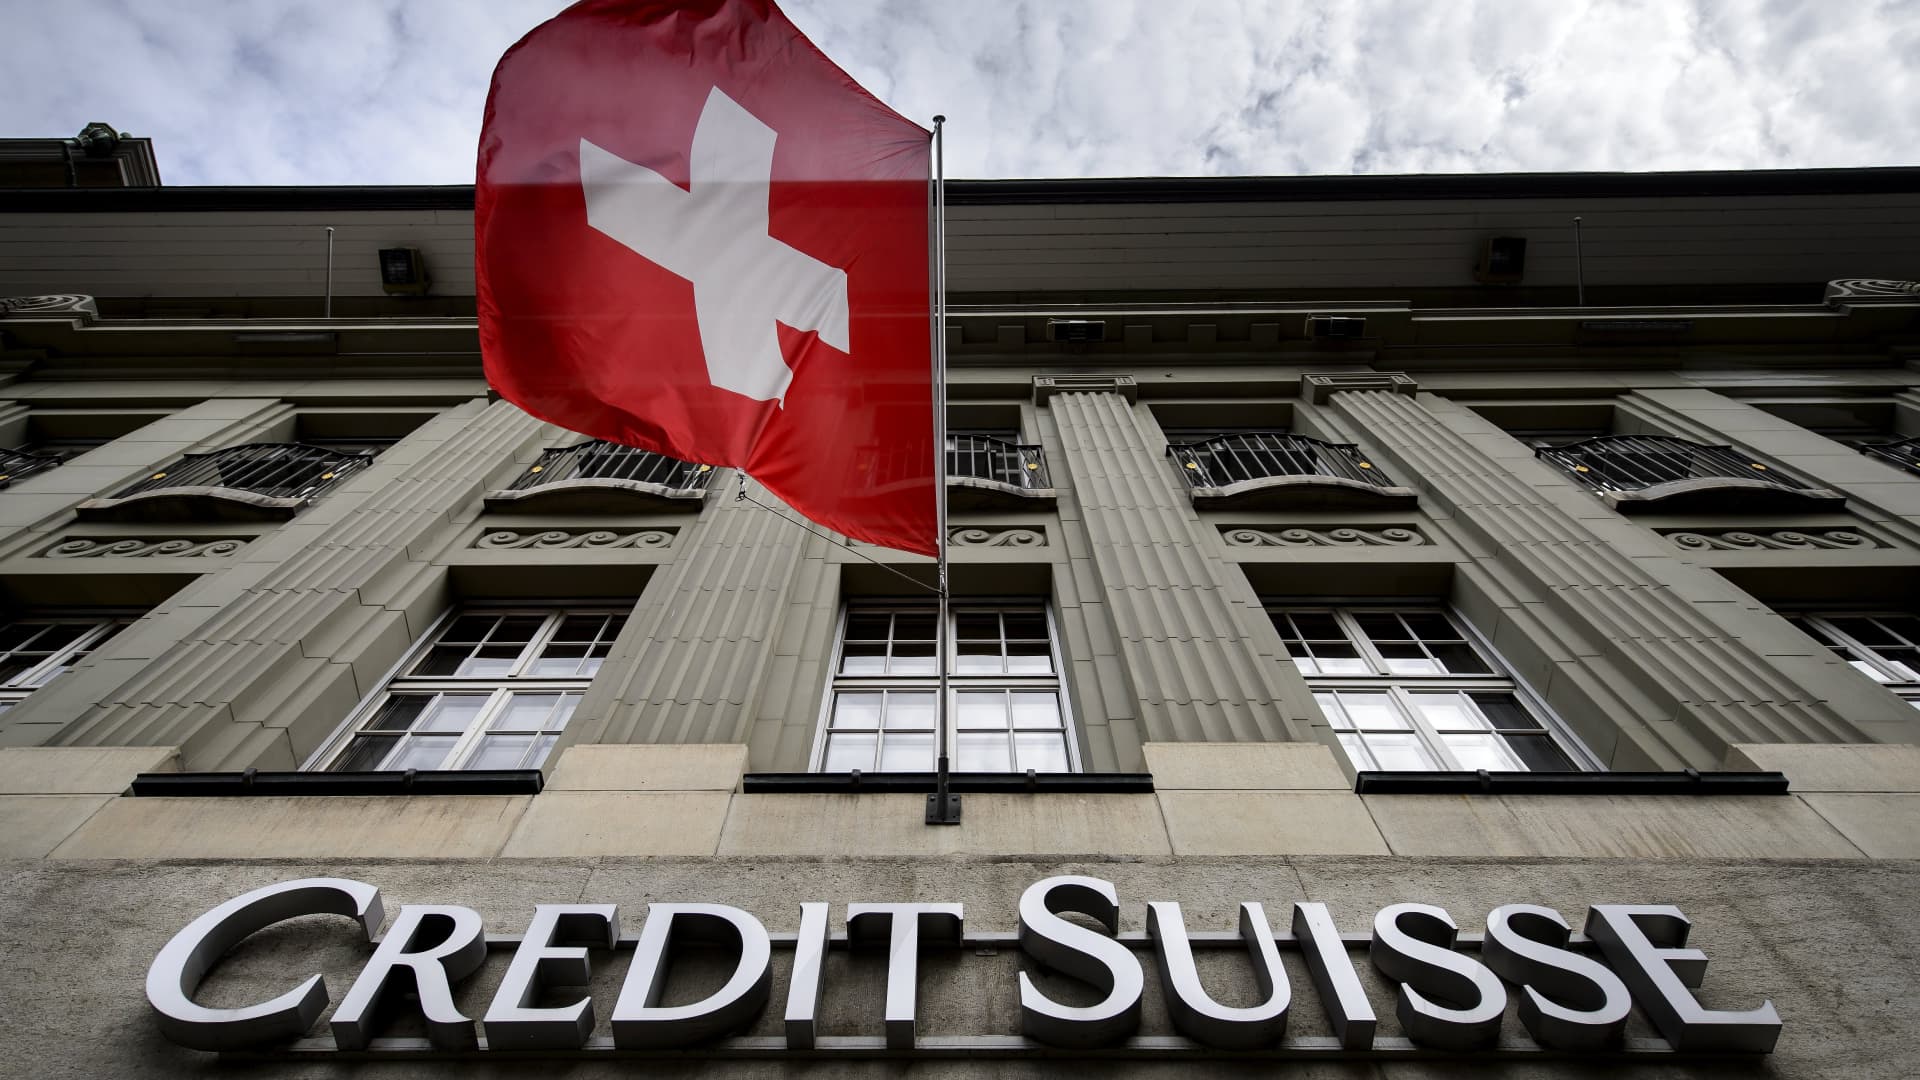 Credit Suisse is reportedly seeking to assure investors as financial concerns rise